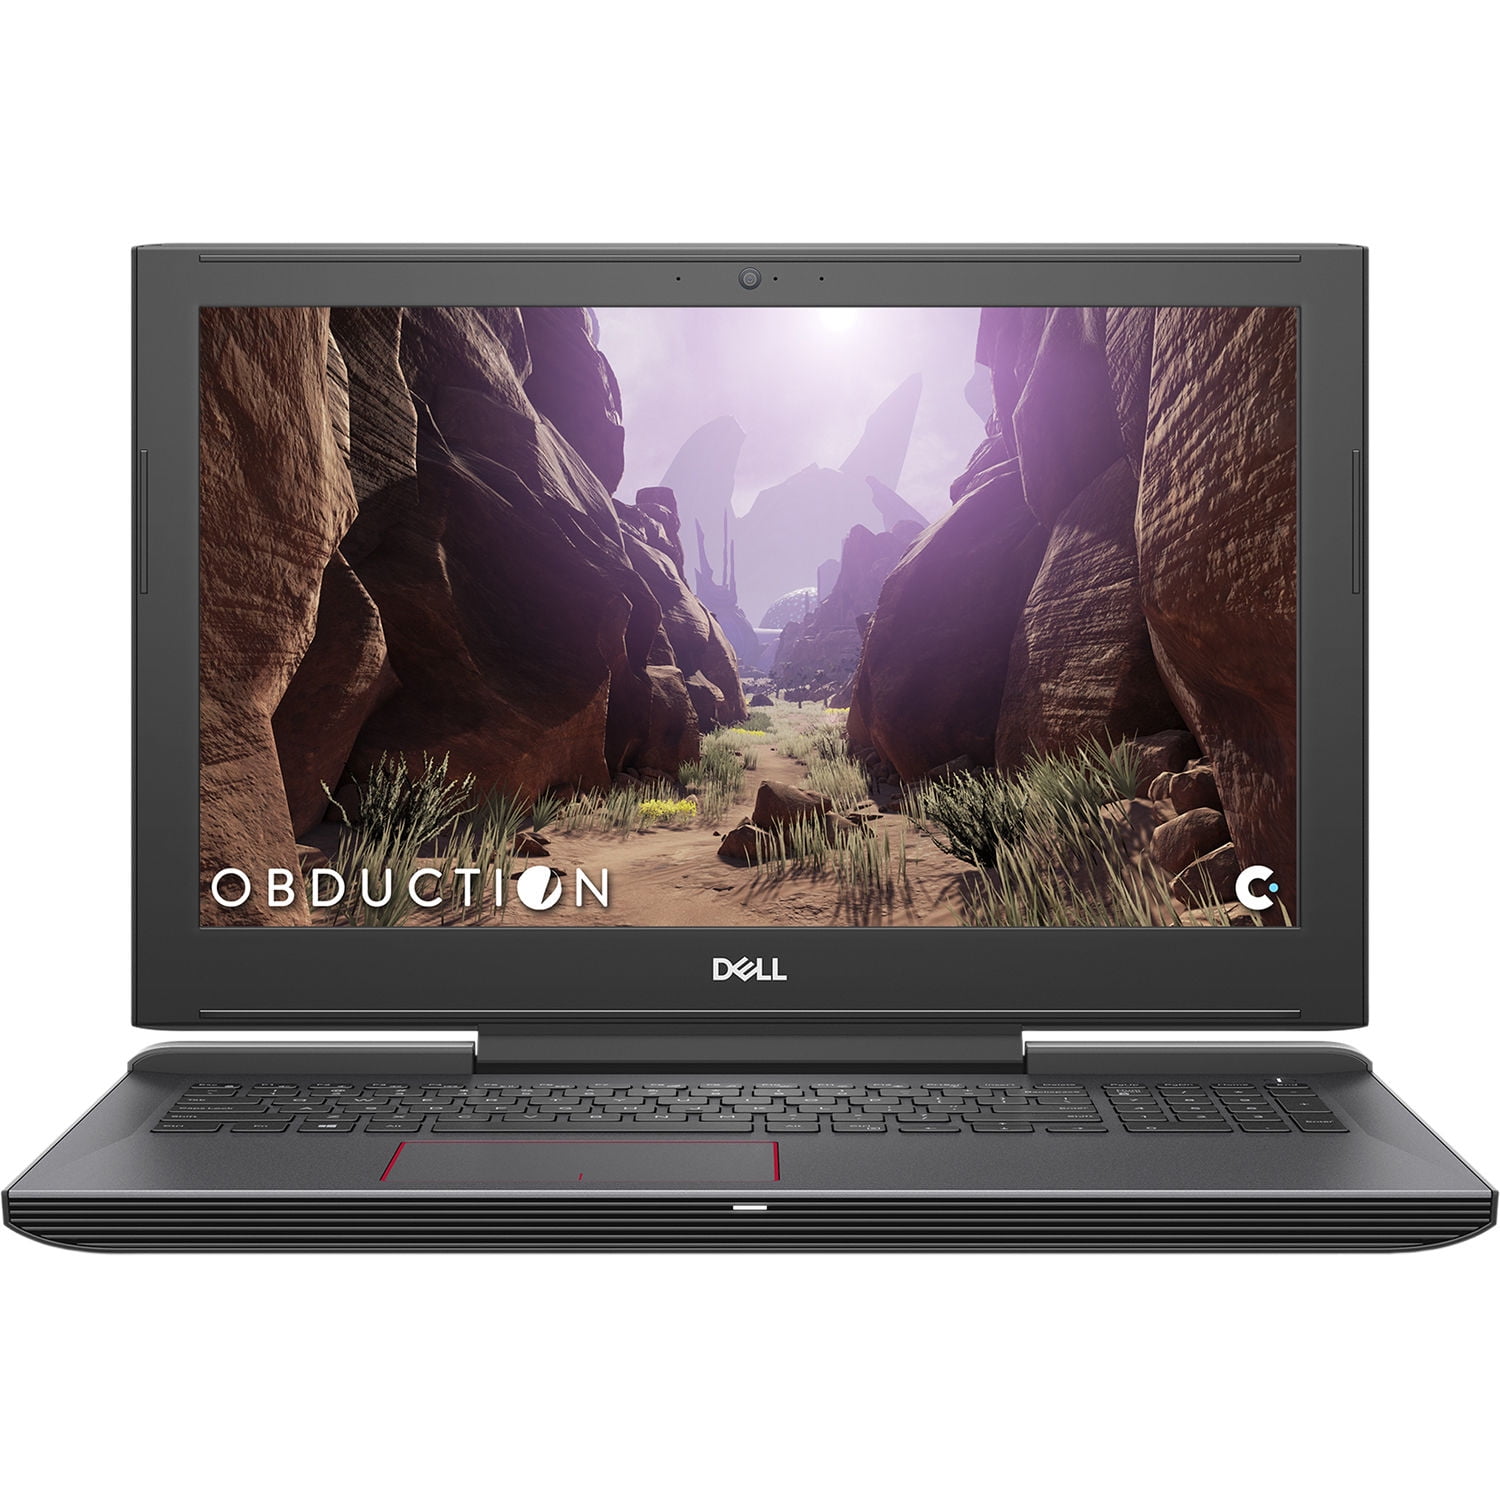 Dell Inspiron 7577 Gaming Laptop, 15.6